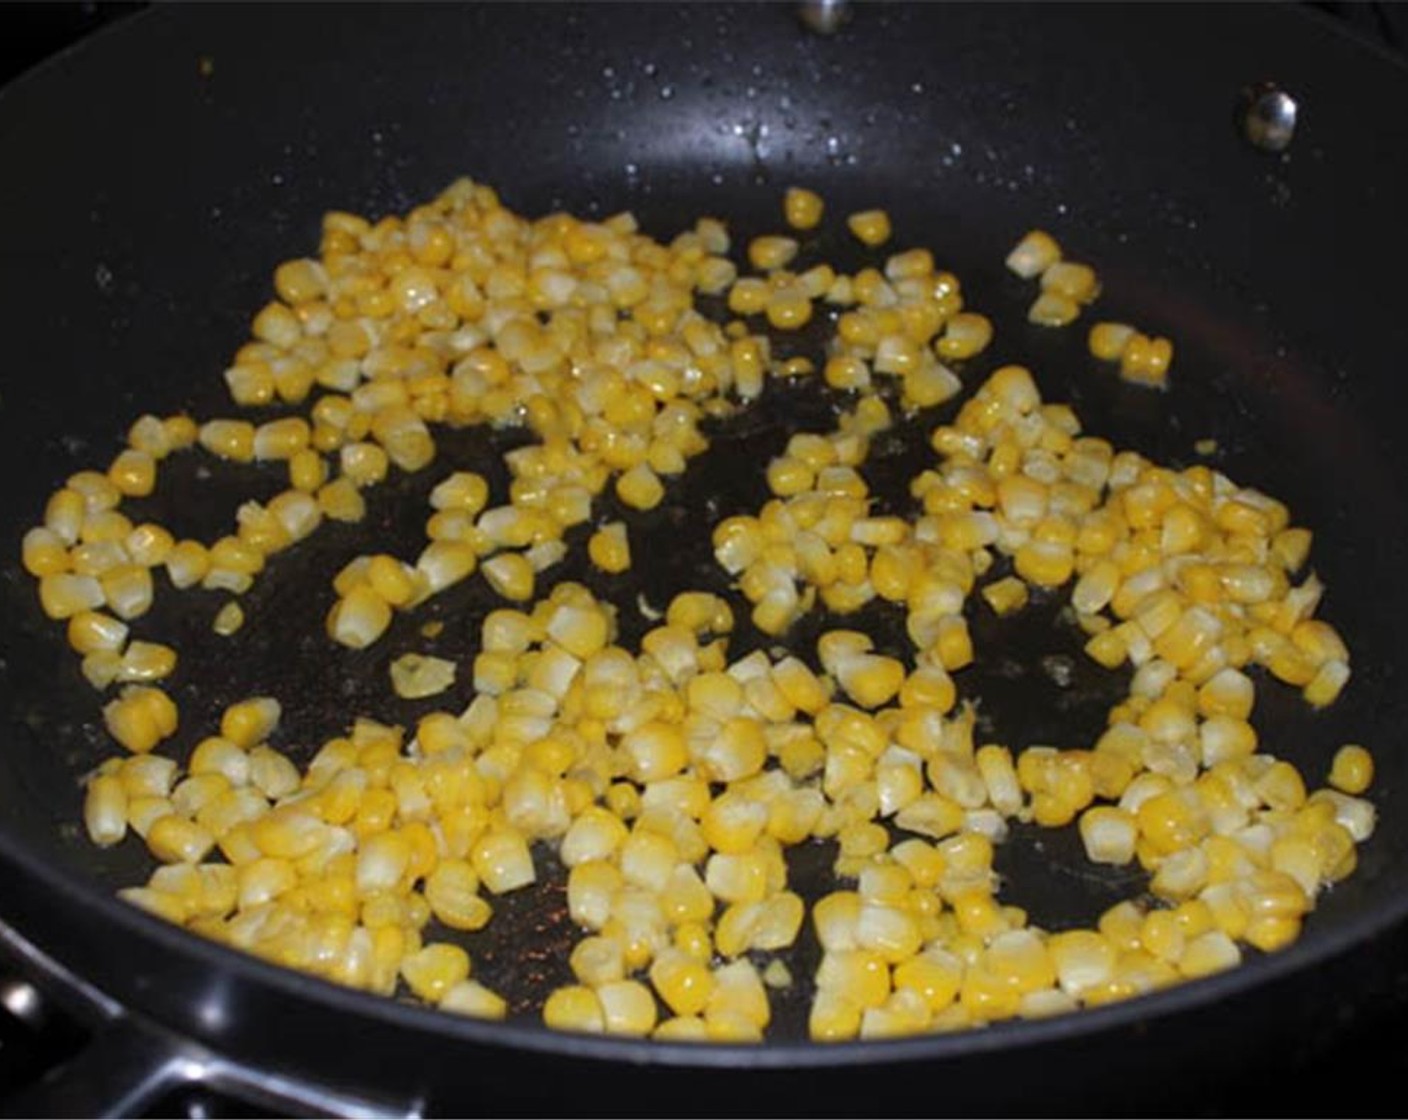 step 5 Heat one tablespoon of olive oil in a large pan. When hot, add the corn kernels and sauté for about 3 minutes until just tender.